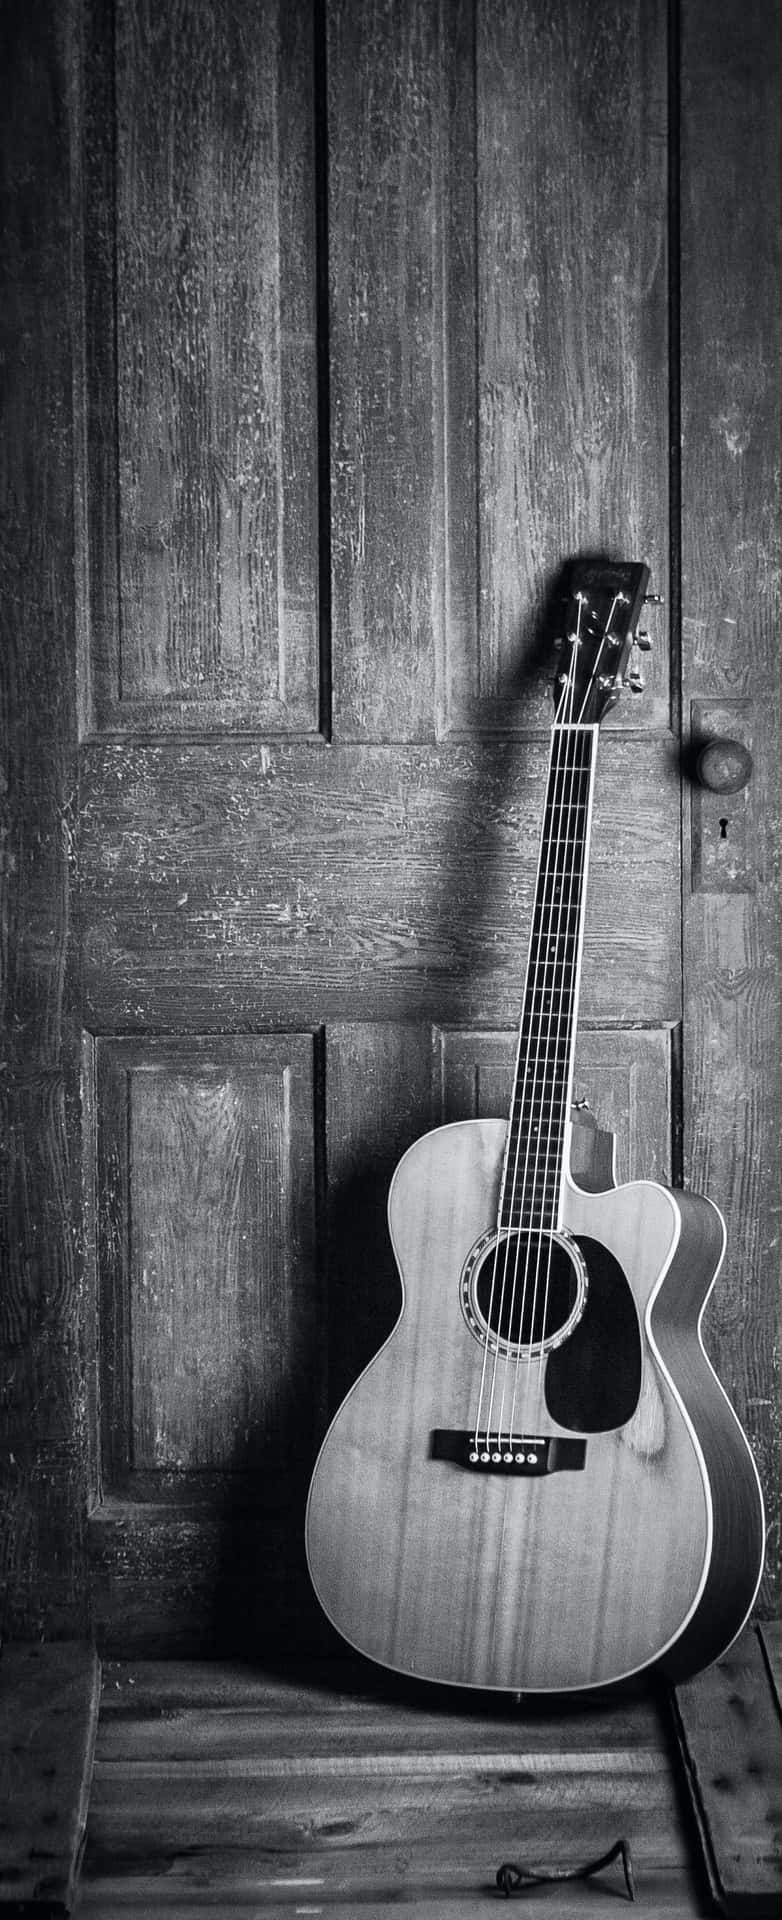 A Beautiful Acoustic Guitar, Perfect For Getting Creative!